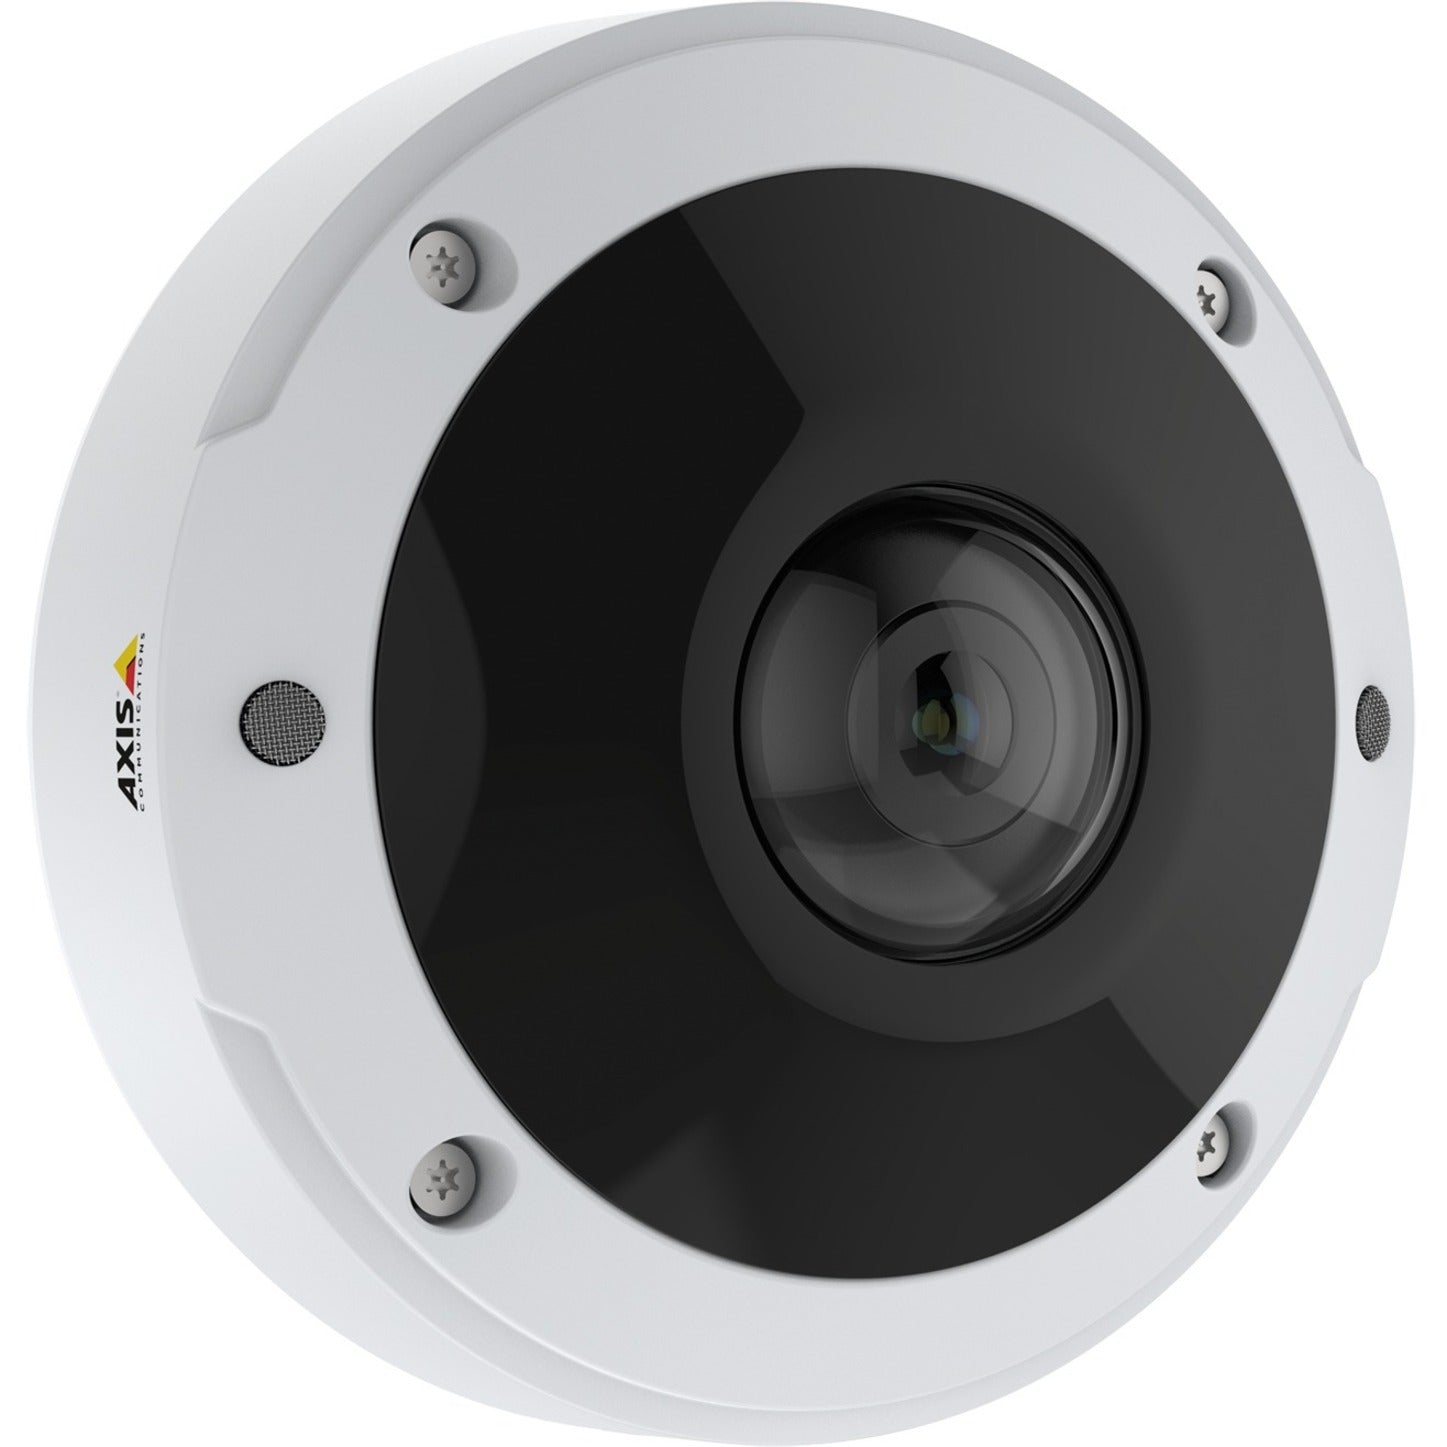 AXIS 02018-001 M3077-PLVE Network Camera, 6 Megapixel Outdoor Dome, Color, 2560 x 1920 Resolution, 60 fps, PoE